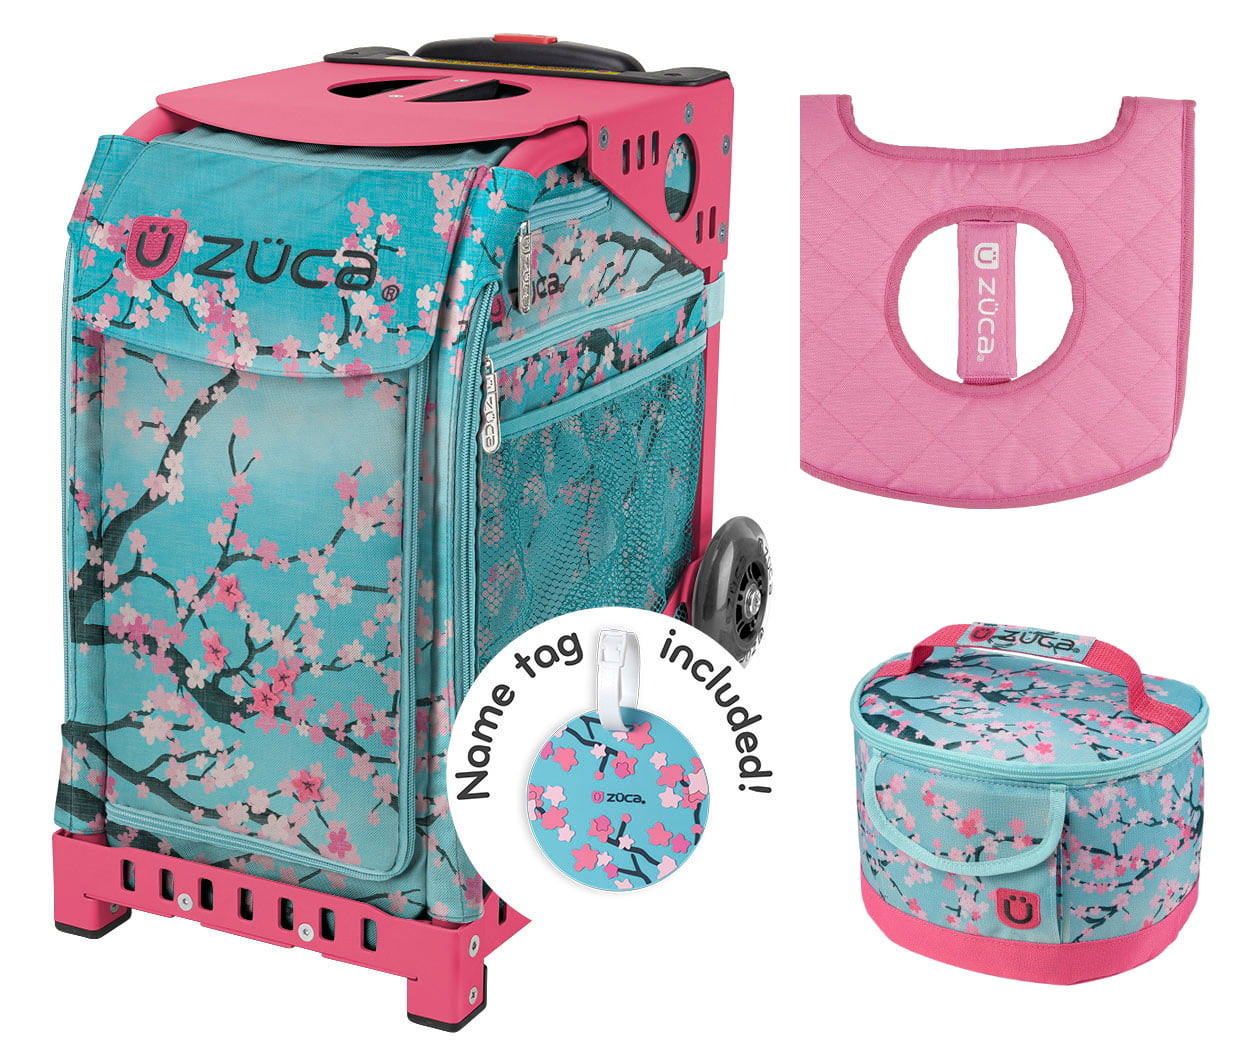 FREE Lunchbox and Seat Cover Hanami Zuca Sport Bag 